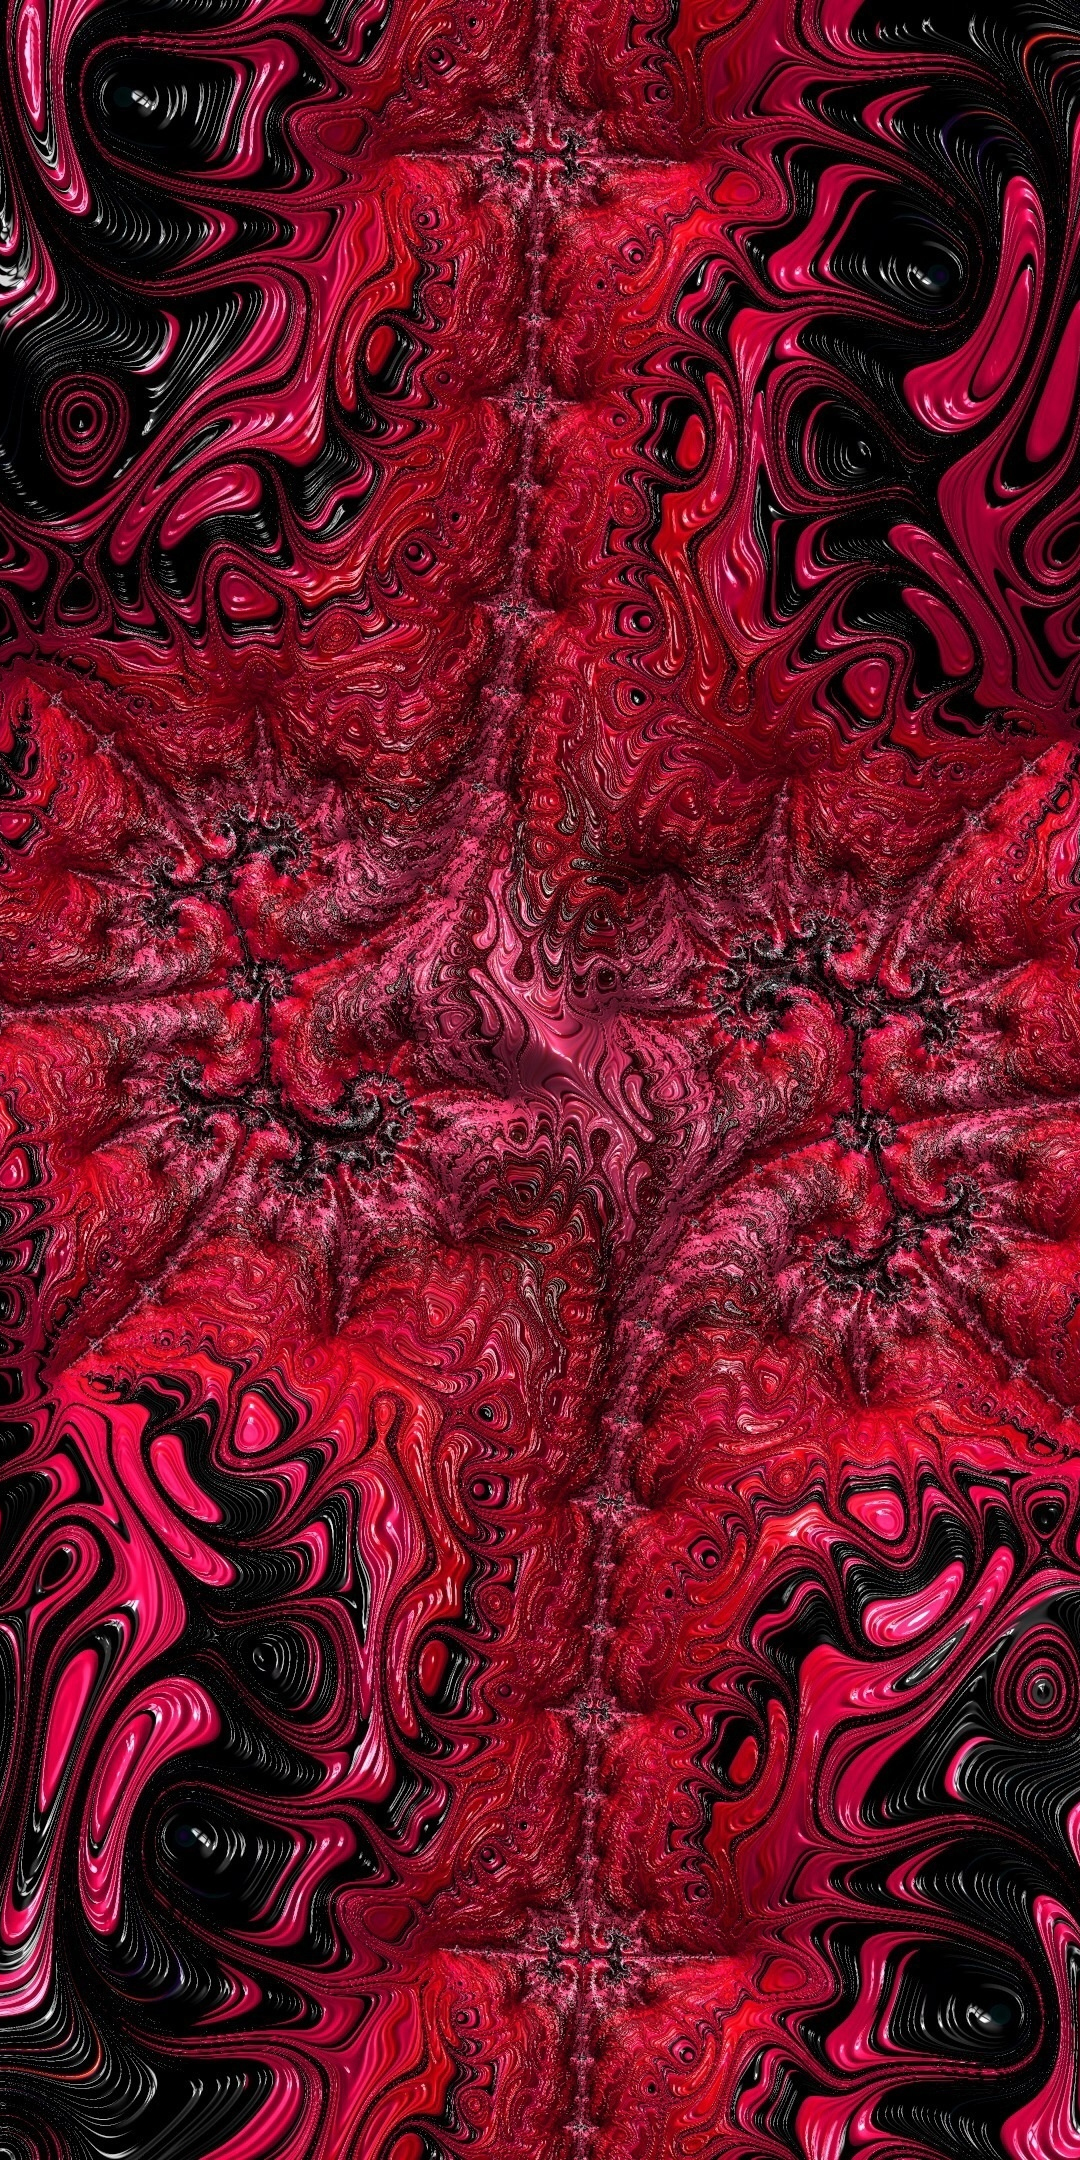 Fractal, glitch art, red and black, abstract, 1080x2160 wallpaper